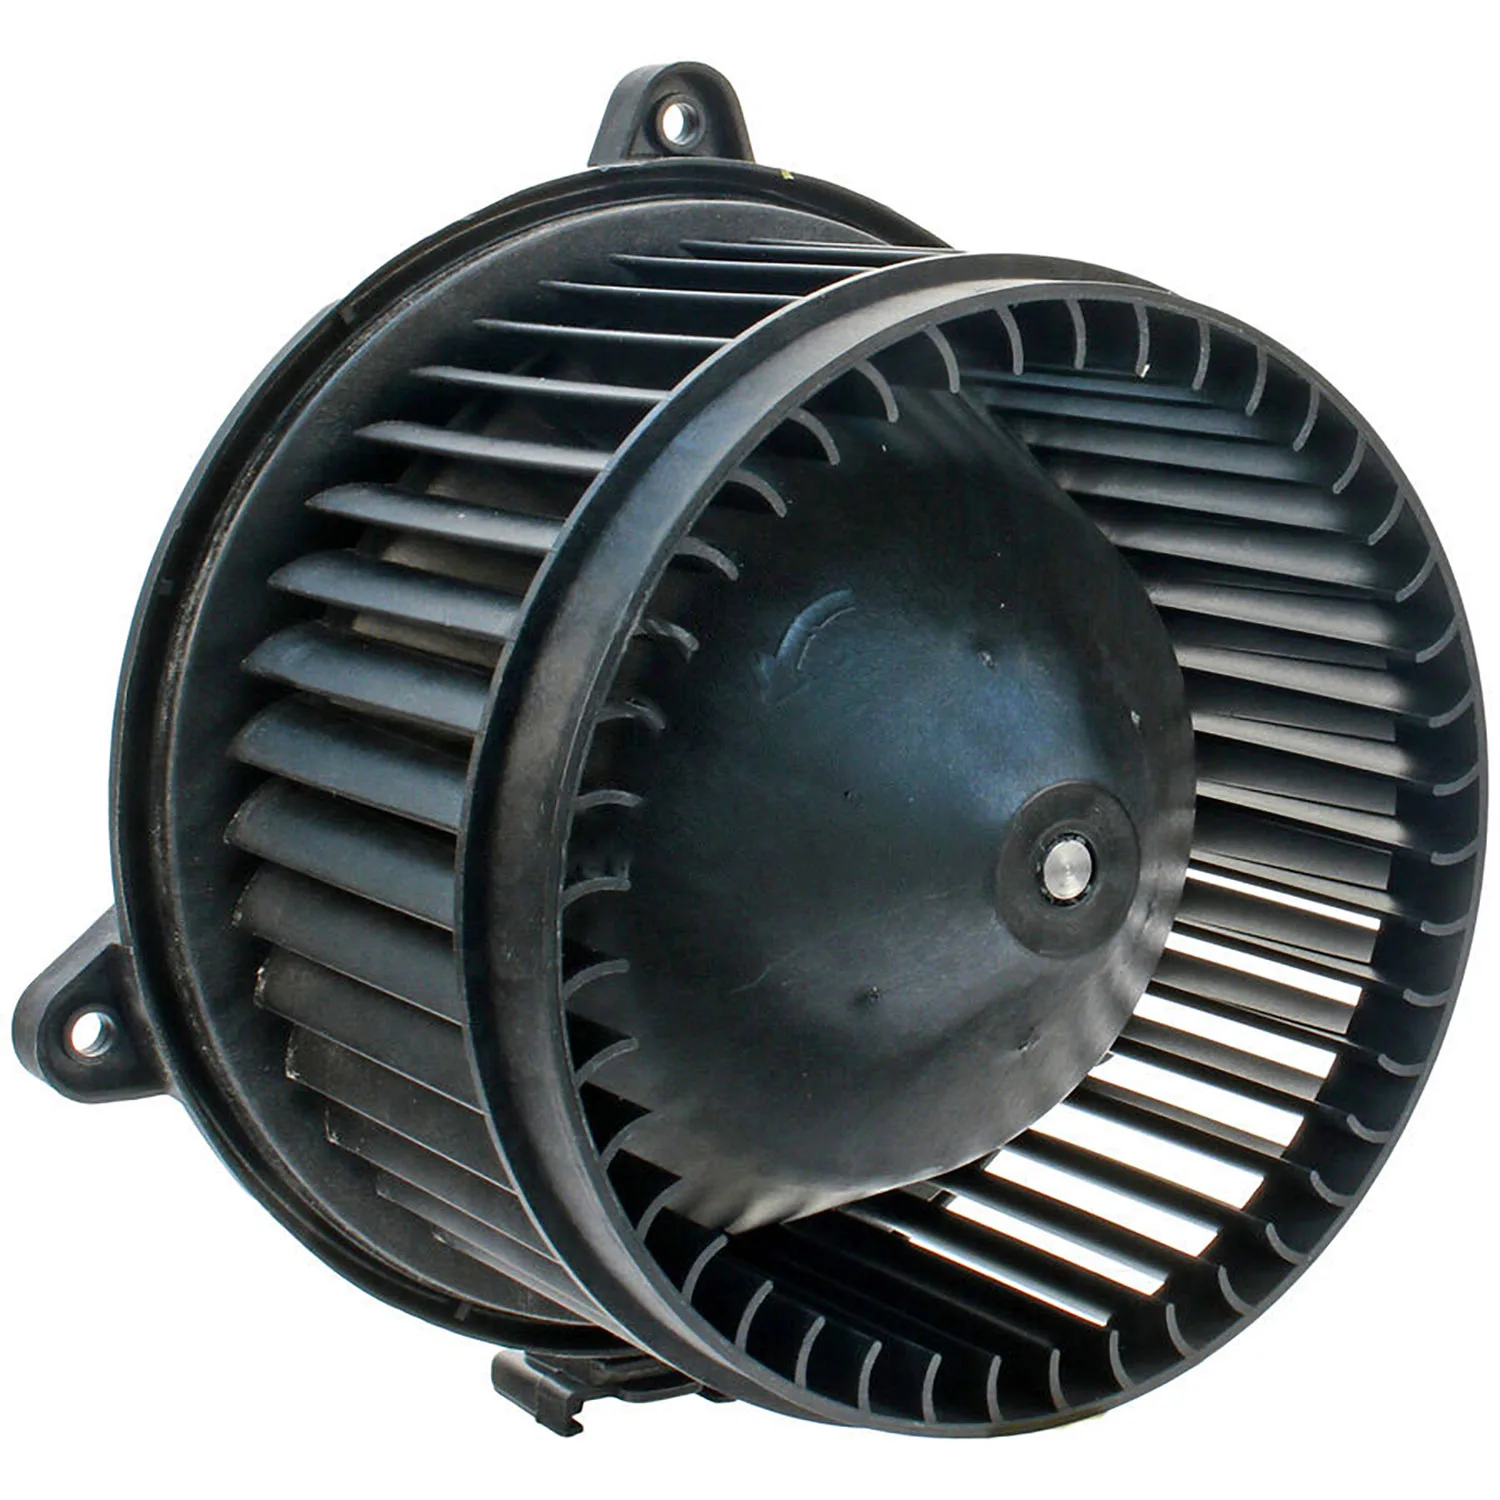 

Air Conditioning Fan AC A/C Blower Motor FOR ISZ 12V MZZ0196 13263279 13369460 1845712 13263279 PM9375 202N10091Z